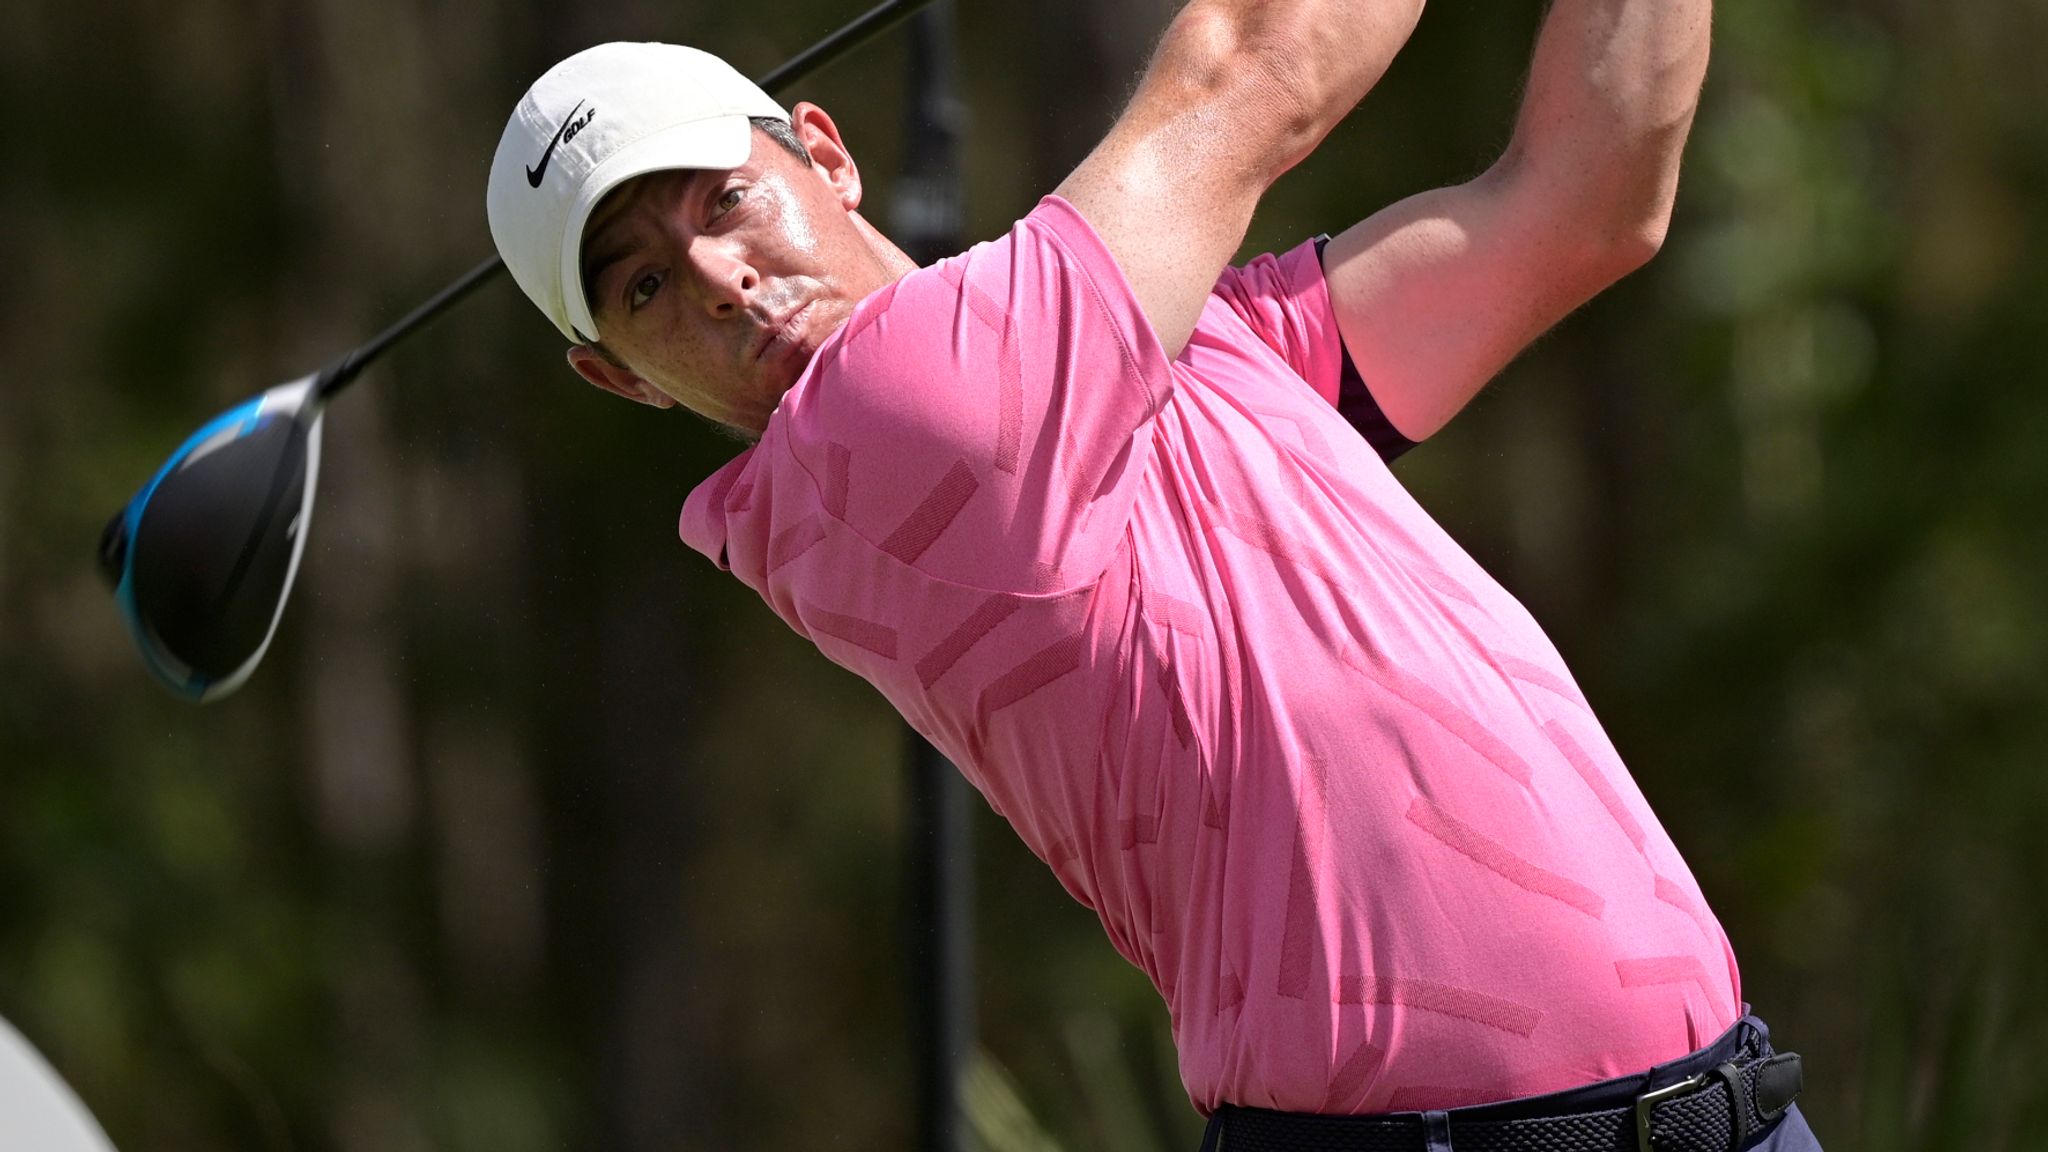 Rory McIlroy returns to Masters in search of green jacket  KGET 17